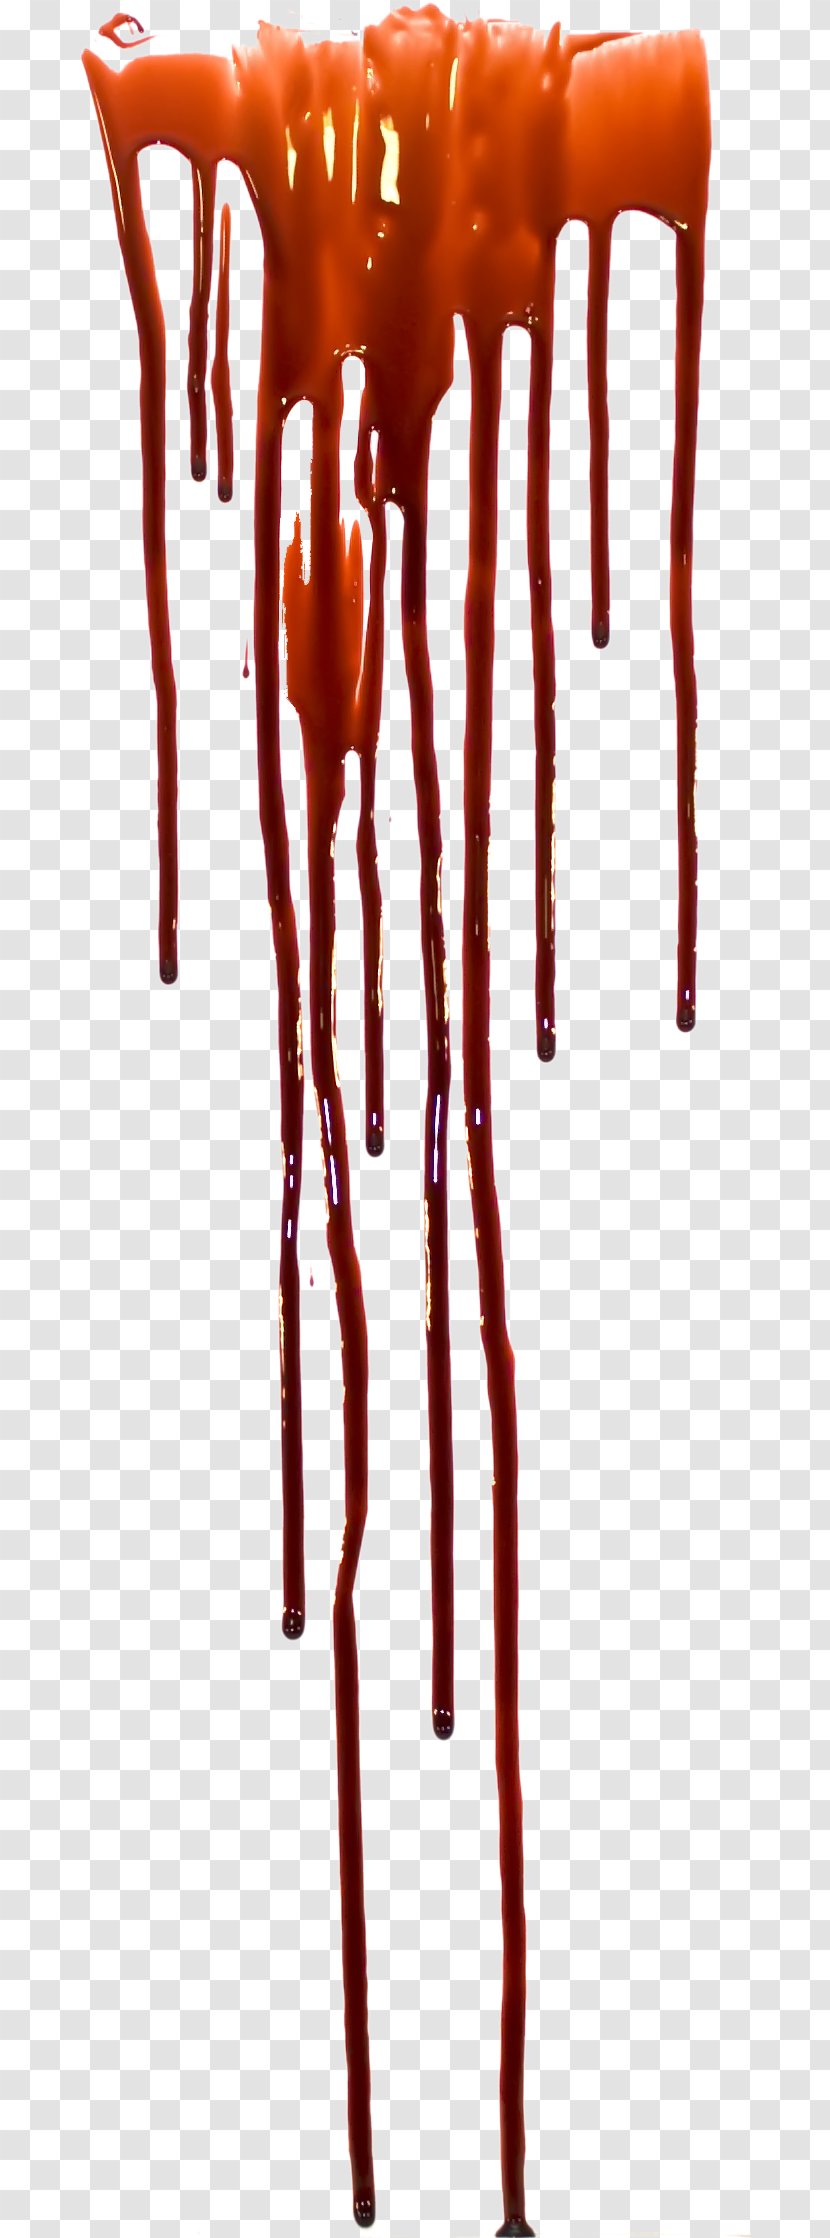 Dripping - Blood Cell - Image File Formats Transparent PNG